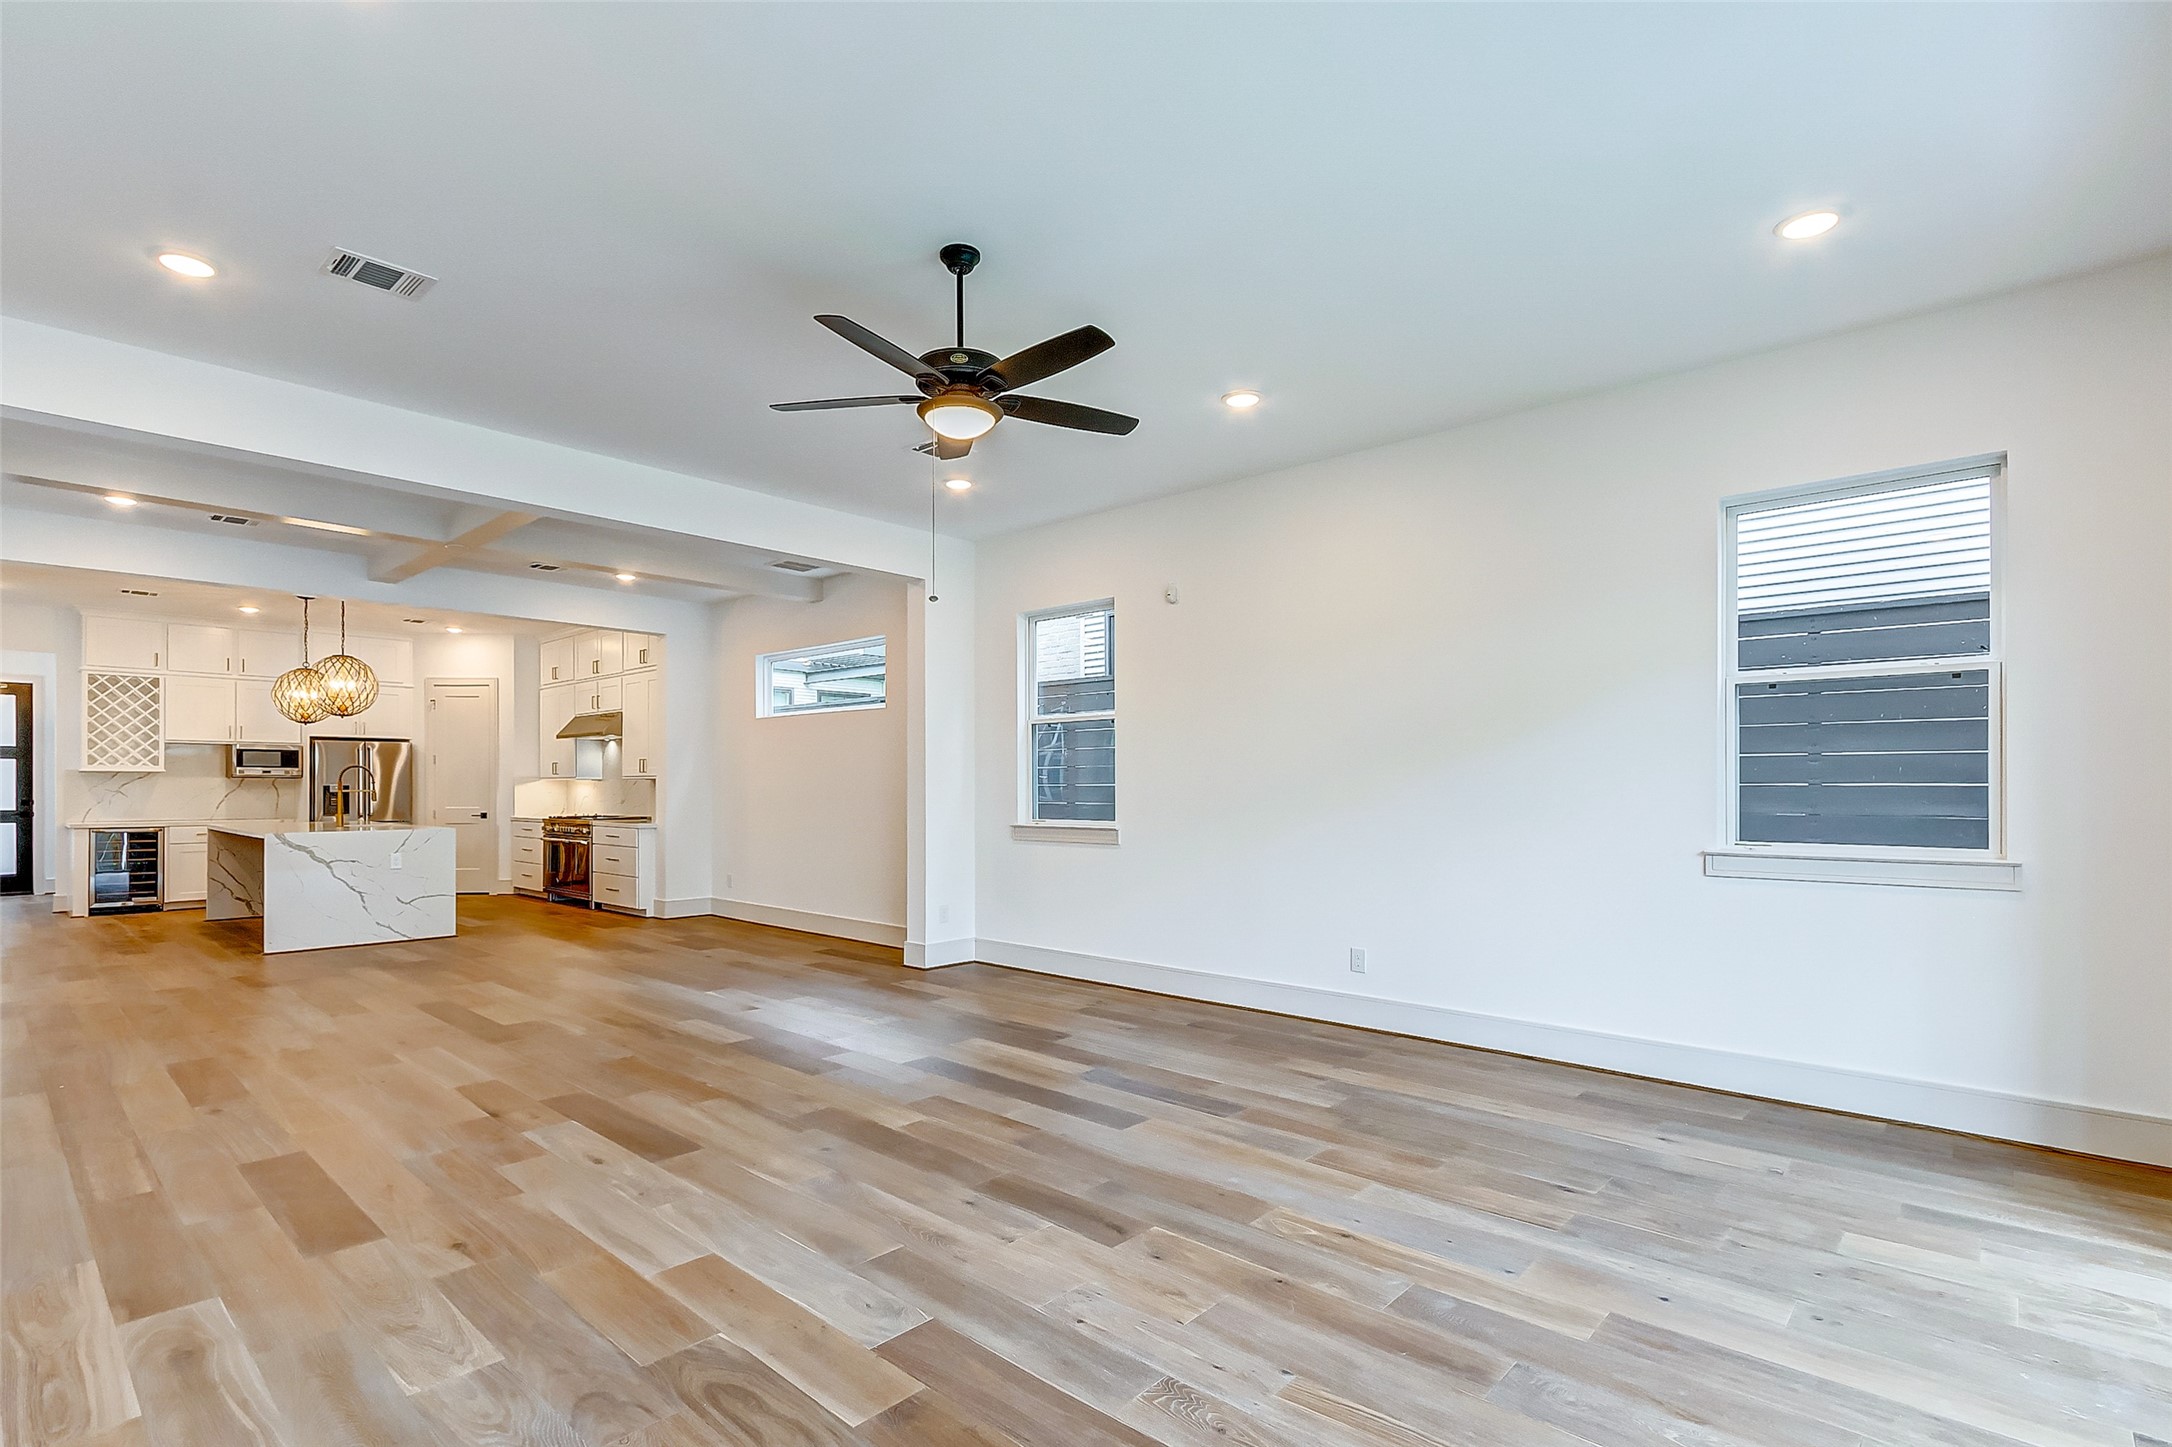 The family room sits adjacent to the kitchen and is SPACIOUS! Features of this large family room include designer paint, tall ceilings, a modern ceiling fan, bright windows, and hardwood floors.